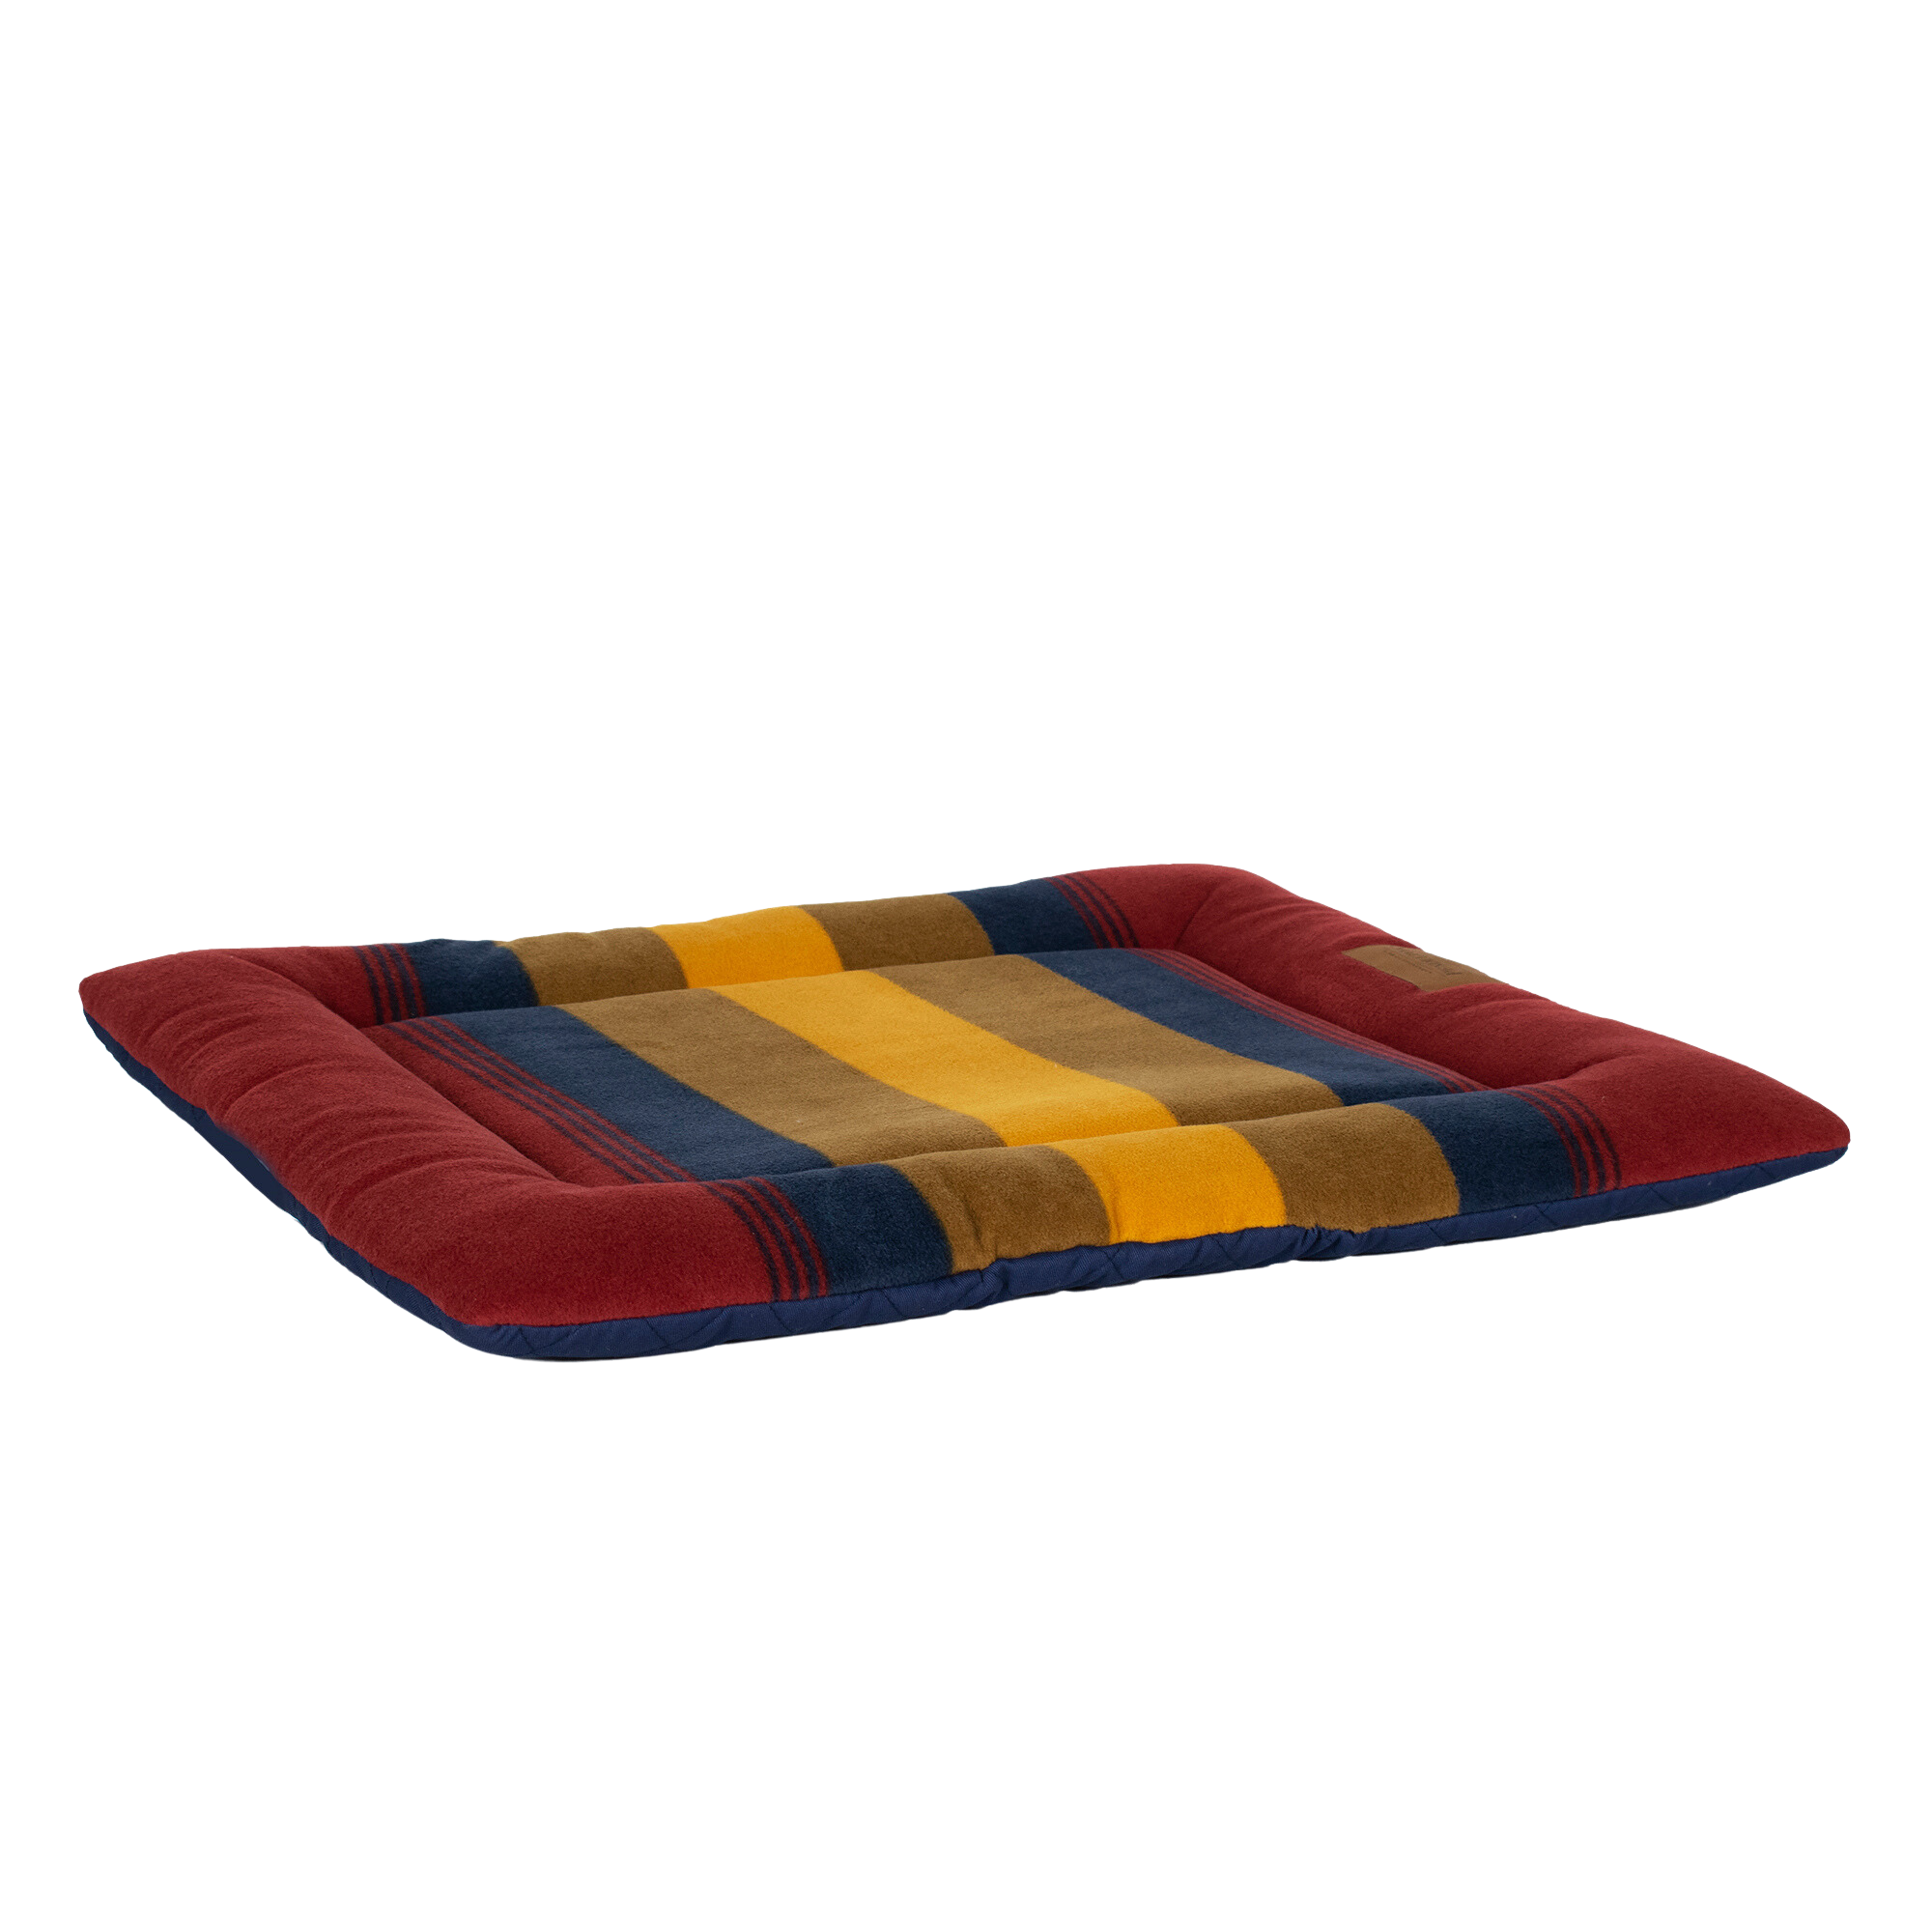 PENDLETON-DOG-BED-KENNEL-MAT-CRATE-RED-YELLOW-BLUE-ZION-NATIONAL-PARK